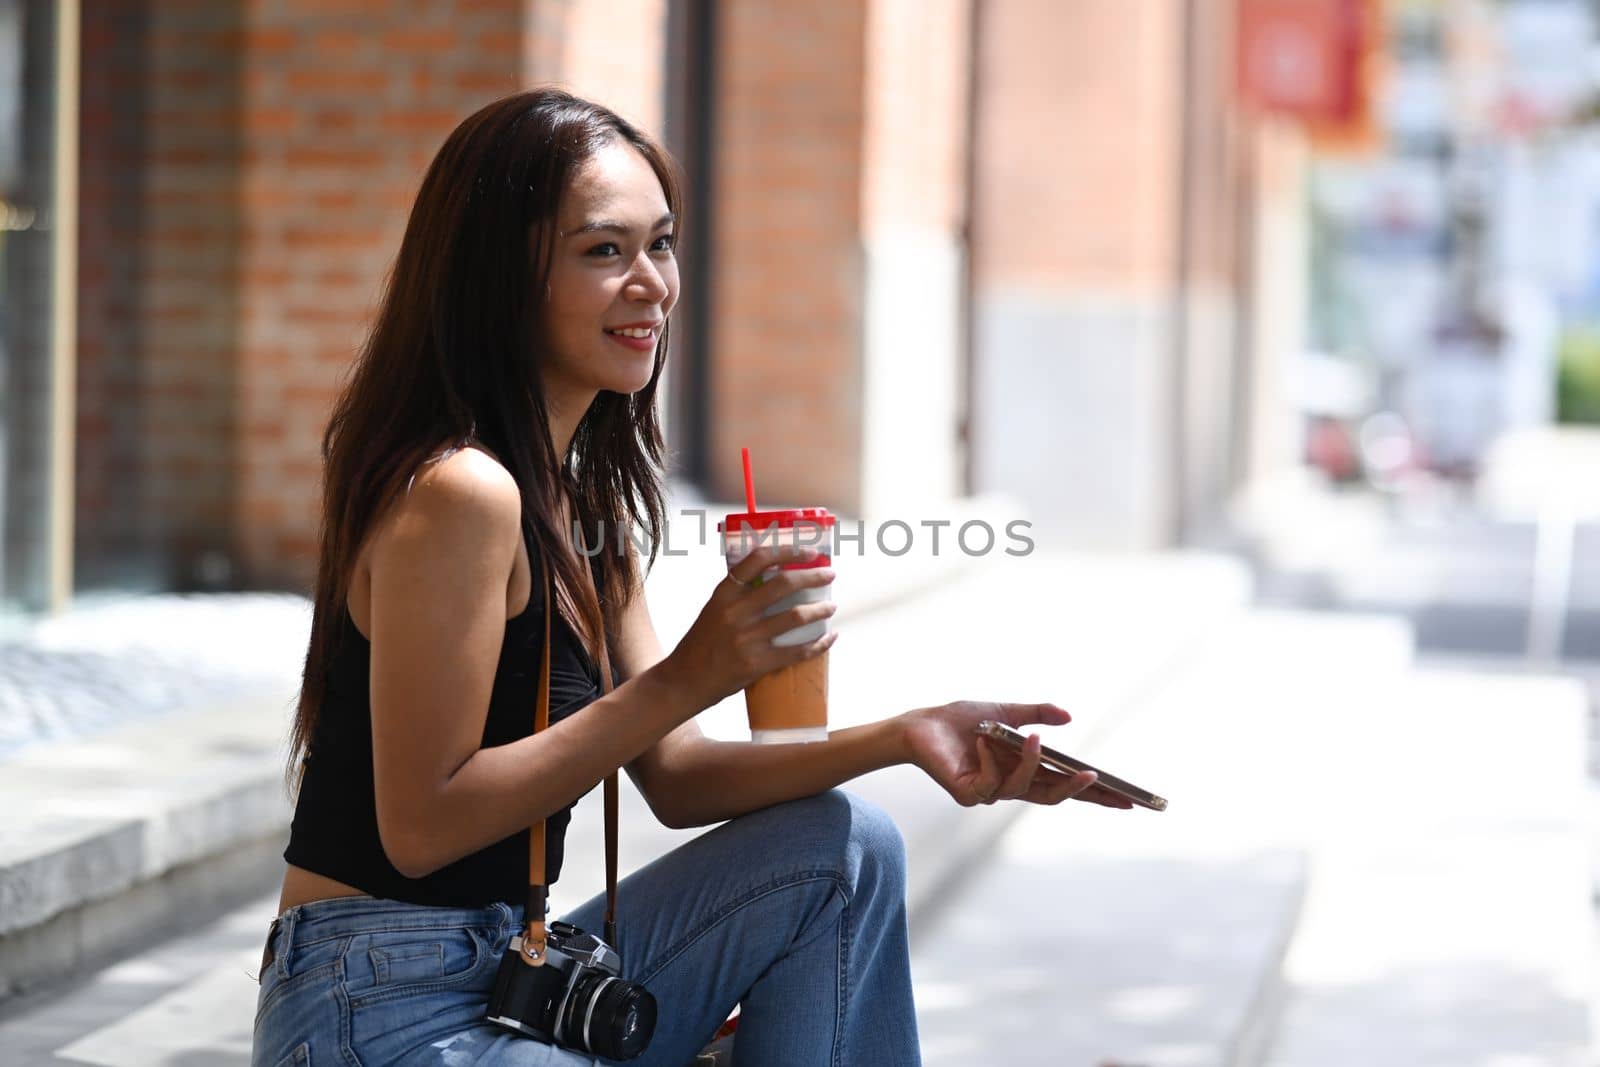 Smiling young woman sitting outdoor holding ice coffee and using smart phone. by prathanchorruangsak